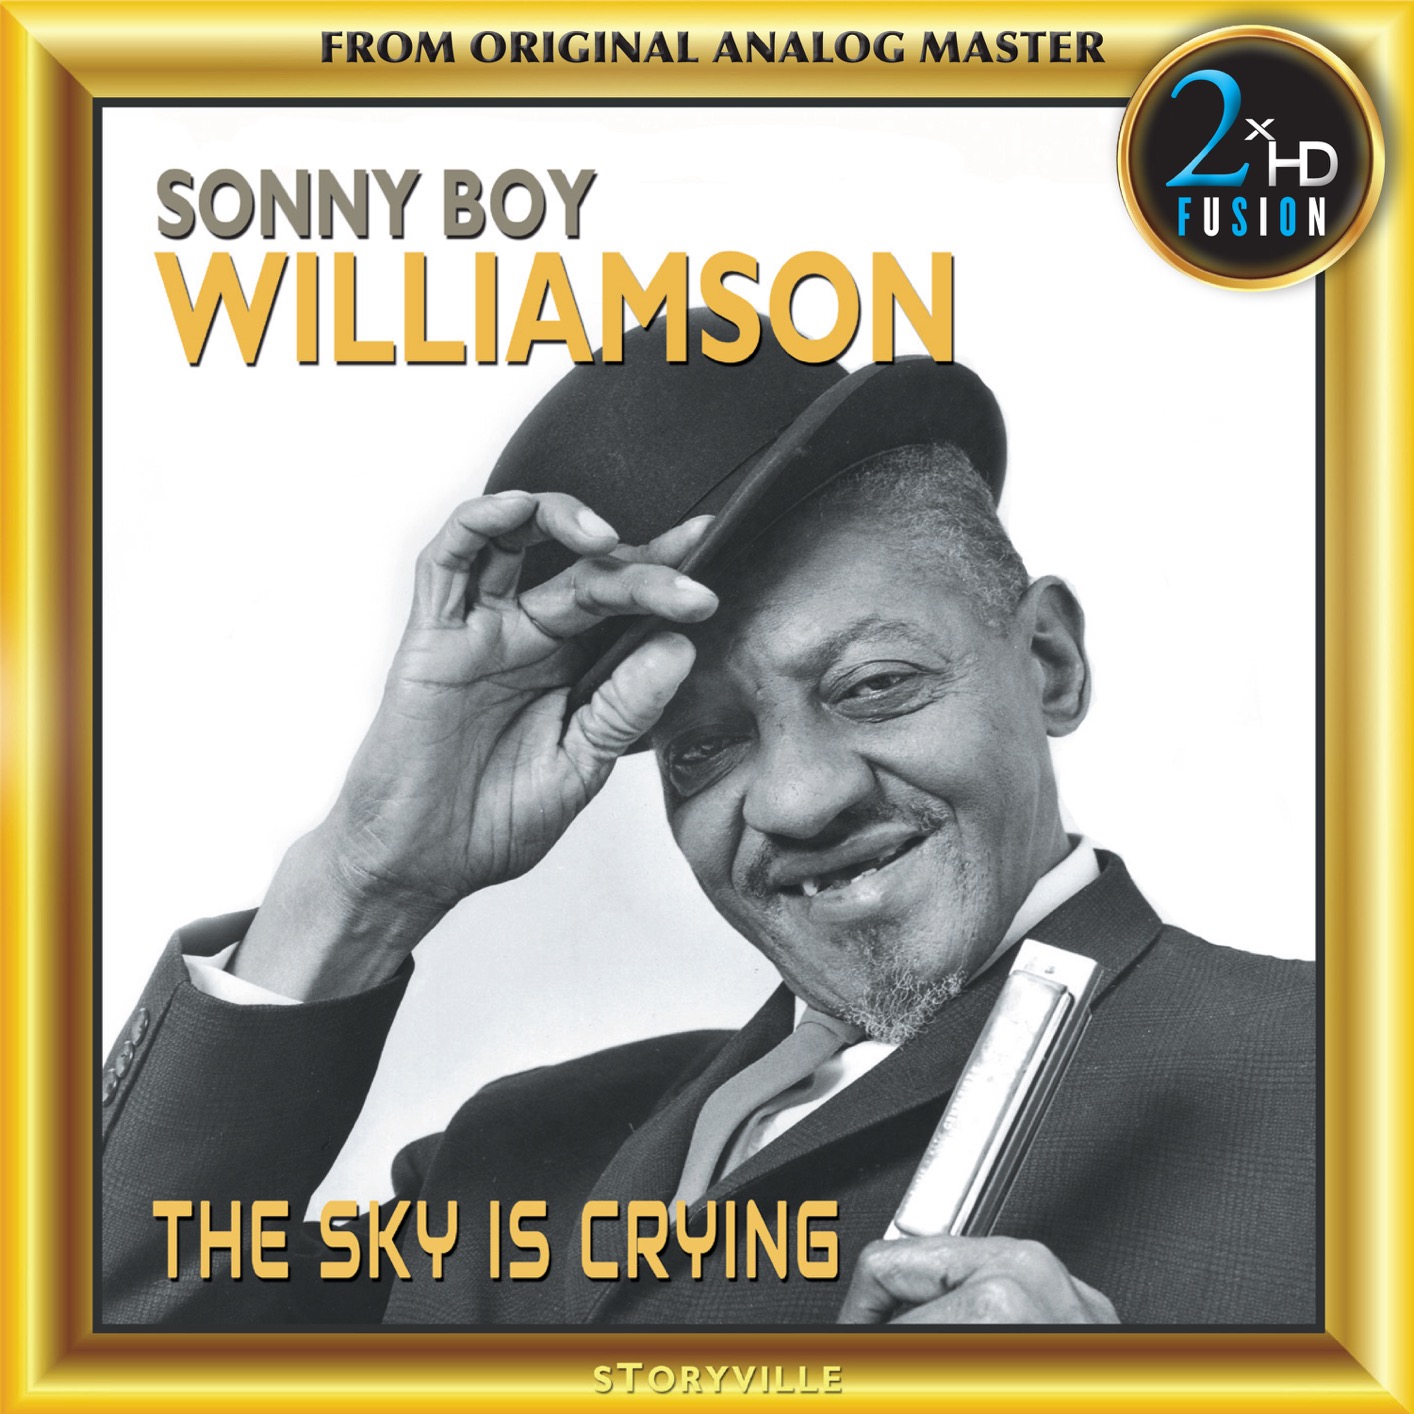 Sonny Boy Williamson – The Sky Is Crying (Remastered) (2017) [FLAC 24bit/192kHz]